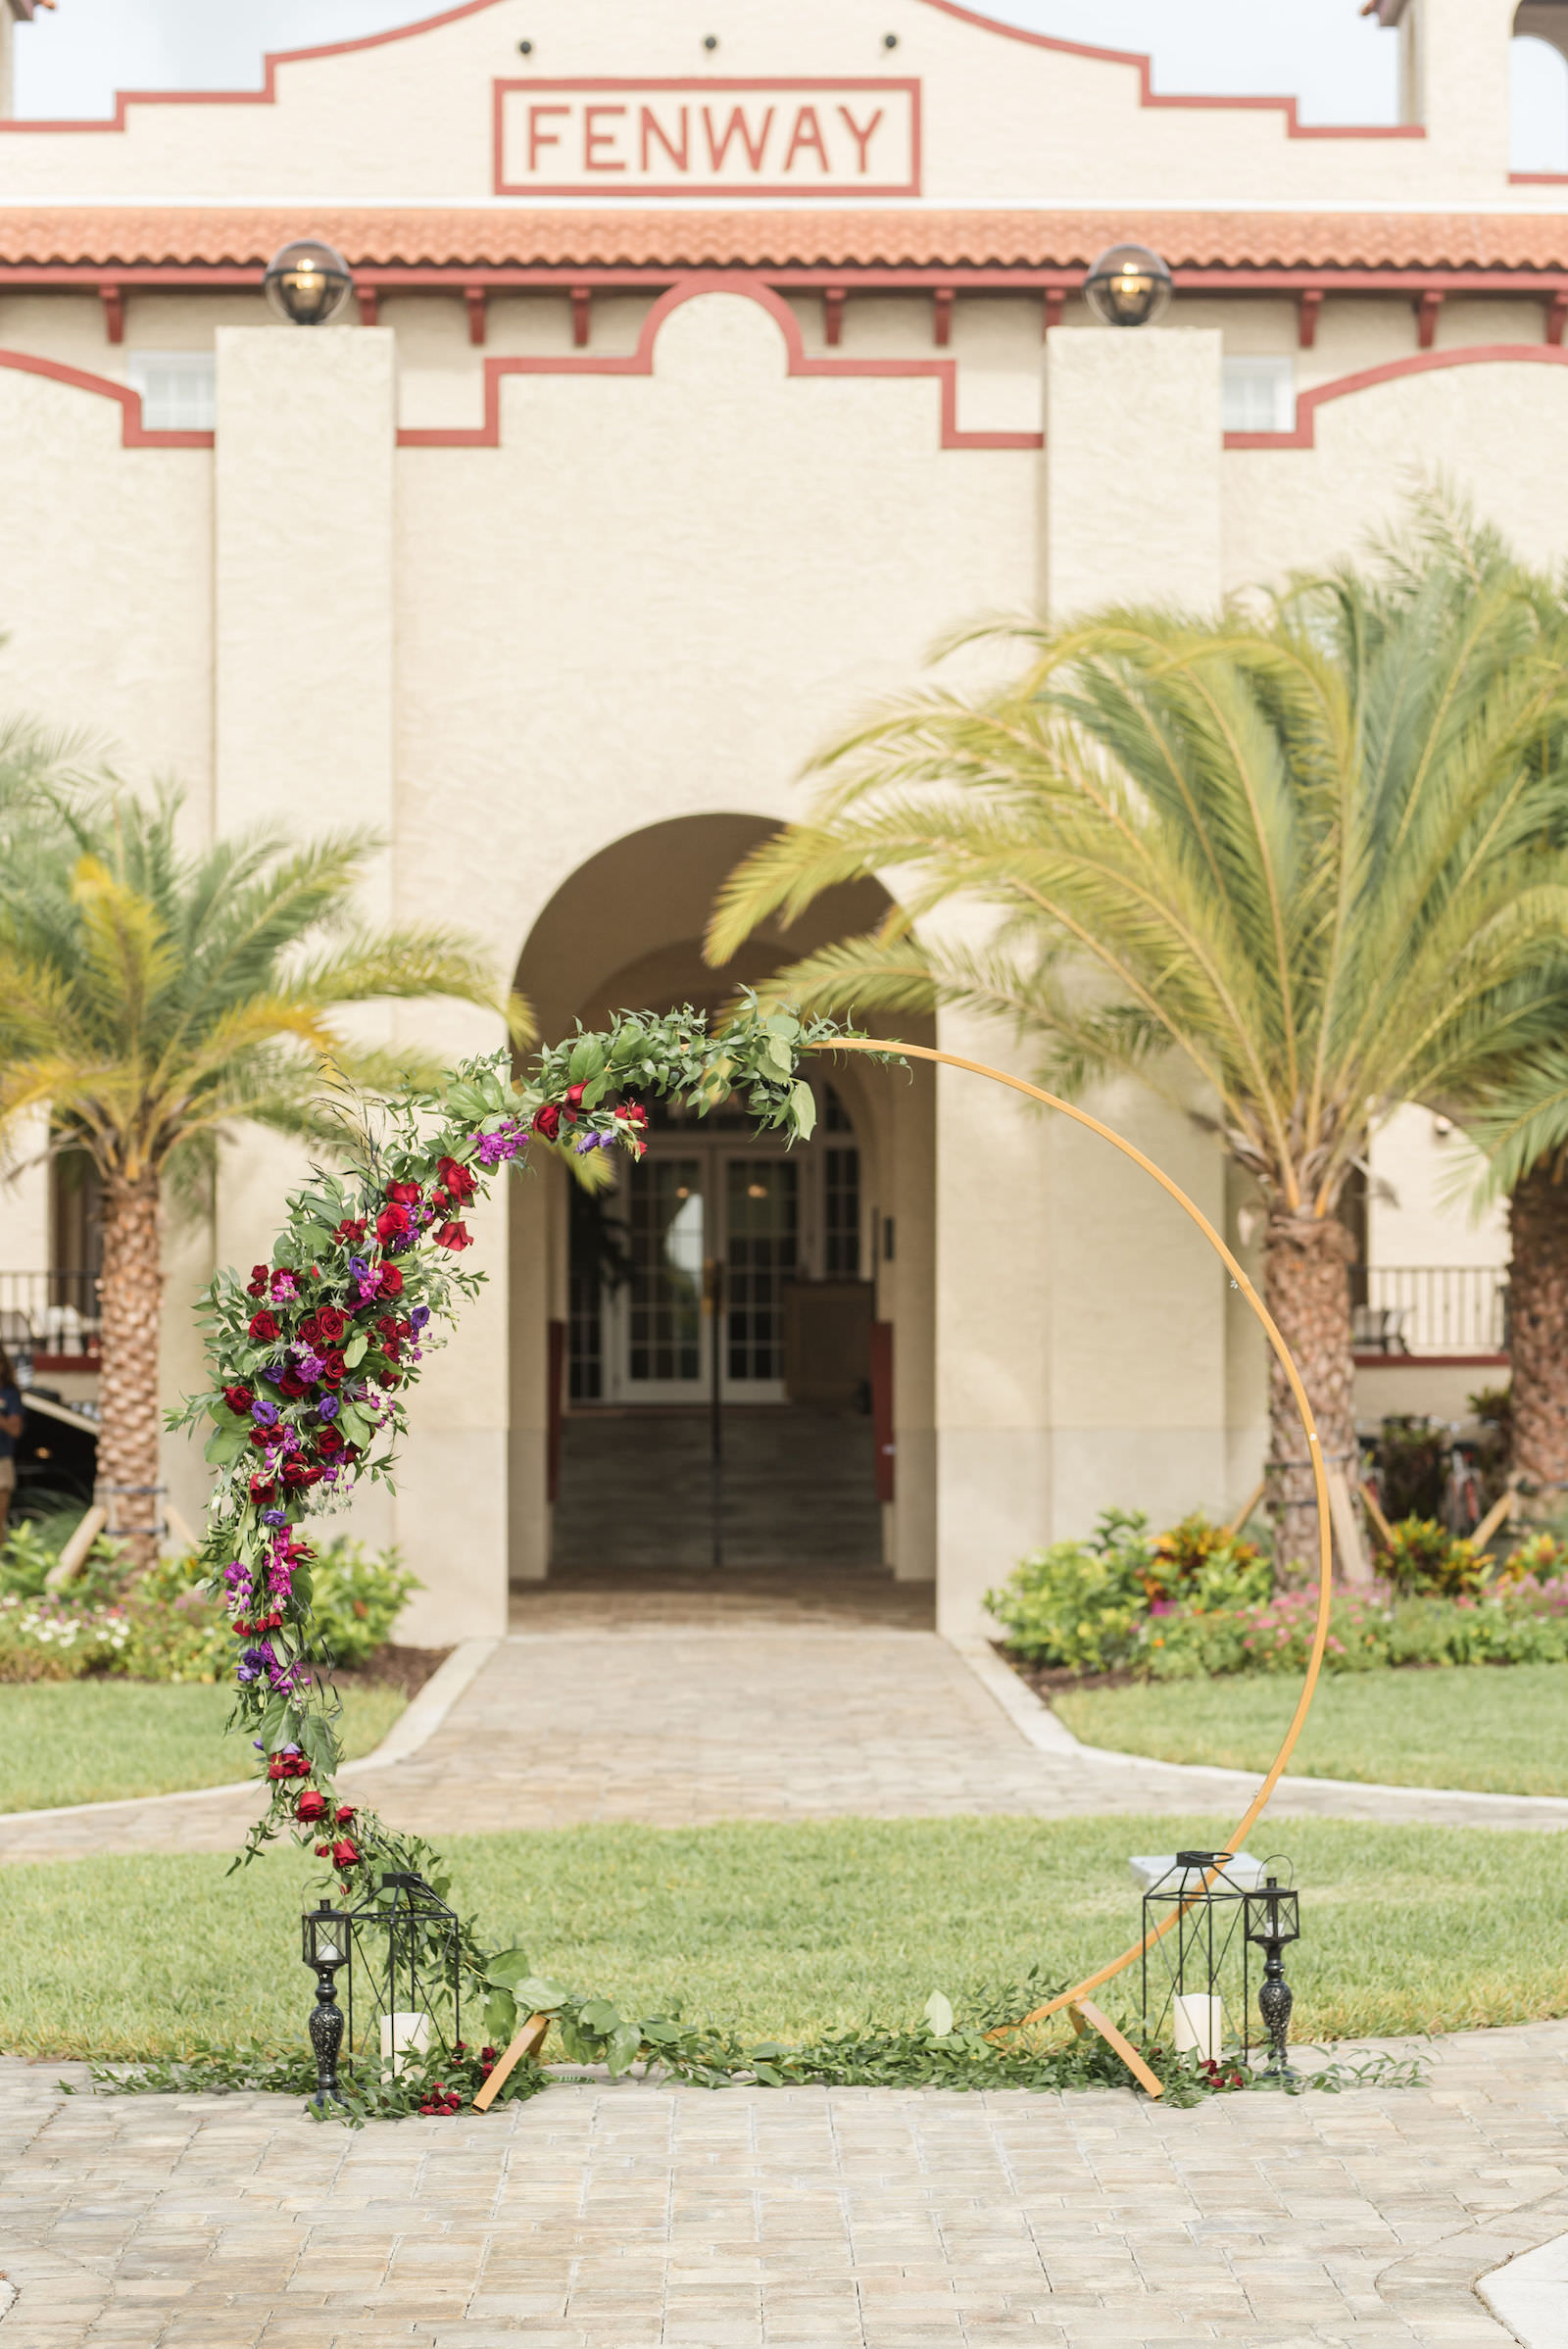 Modern Rock N Roll Wedding, Gold Metal Round Arch with Jewel Tone Red and Purple Flowers with Greenery Floral Arrangements, Acrylic Ghost Chairs | Tampa Bay Wedding Photographer Amanda Zabrocki Photography | Wedding Rentals Kate Ryan Event Rentals | Dunedin Wedding Venue The Fenway